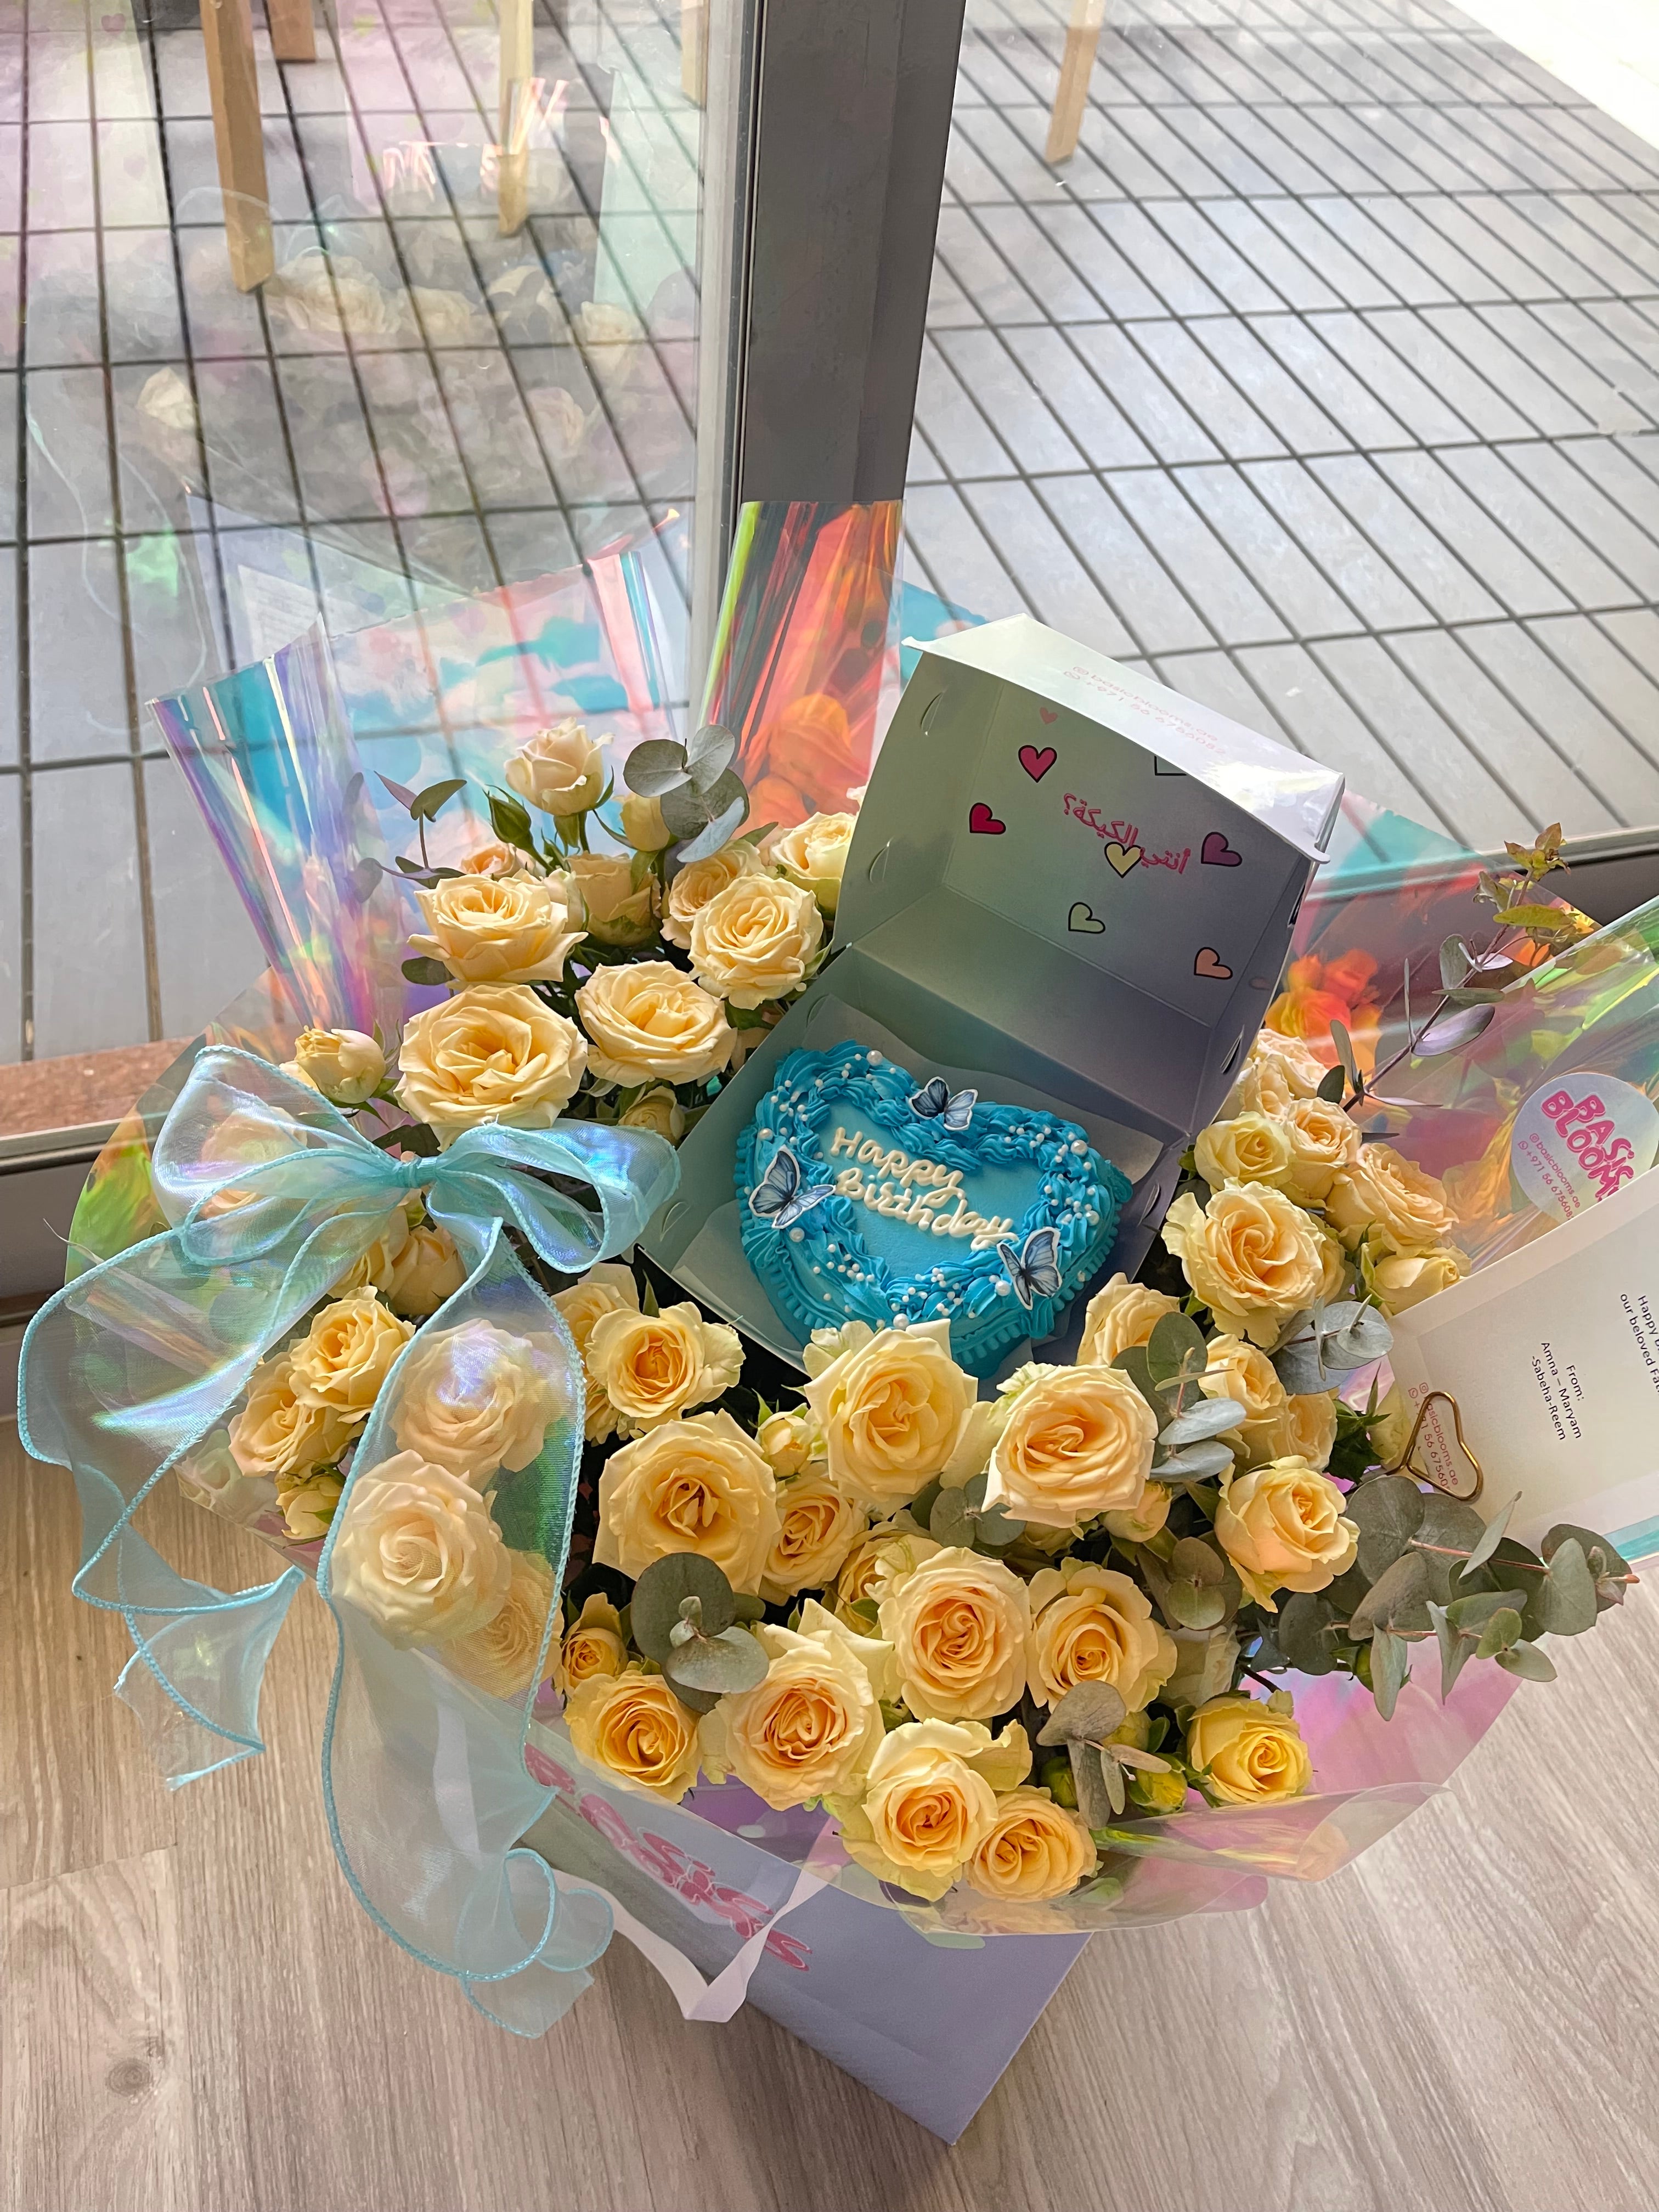 Flowers bouquet with blue cake💙